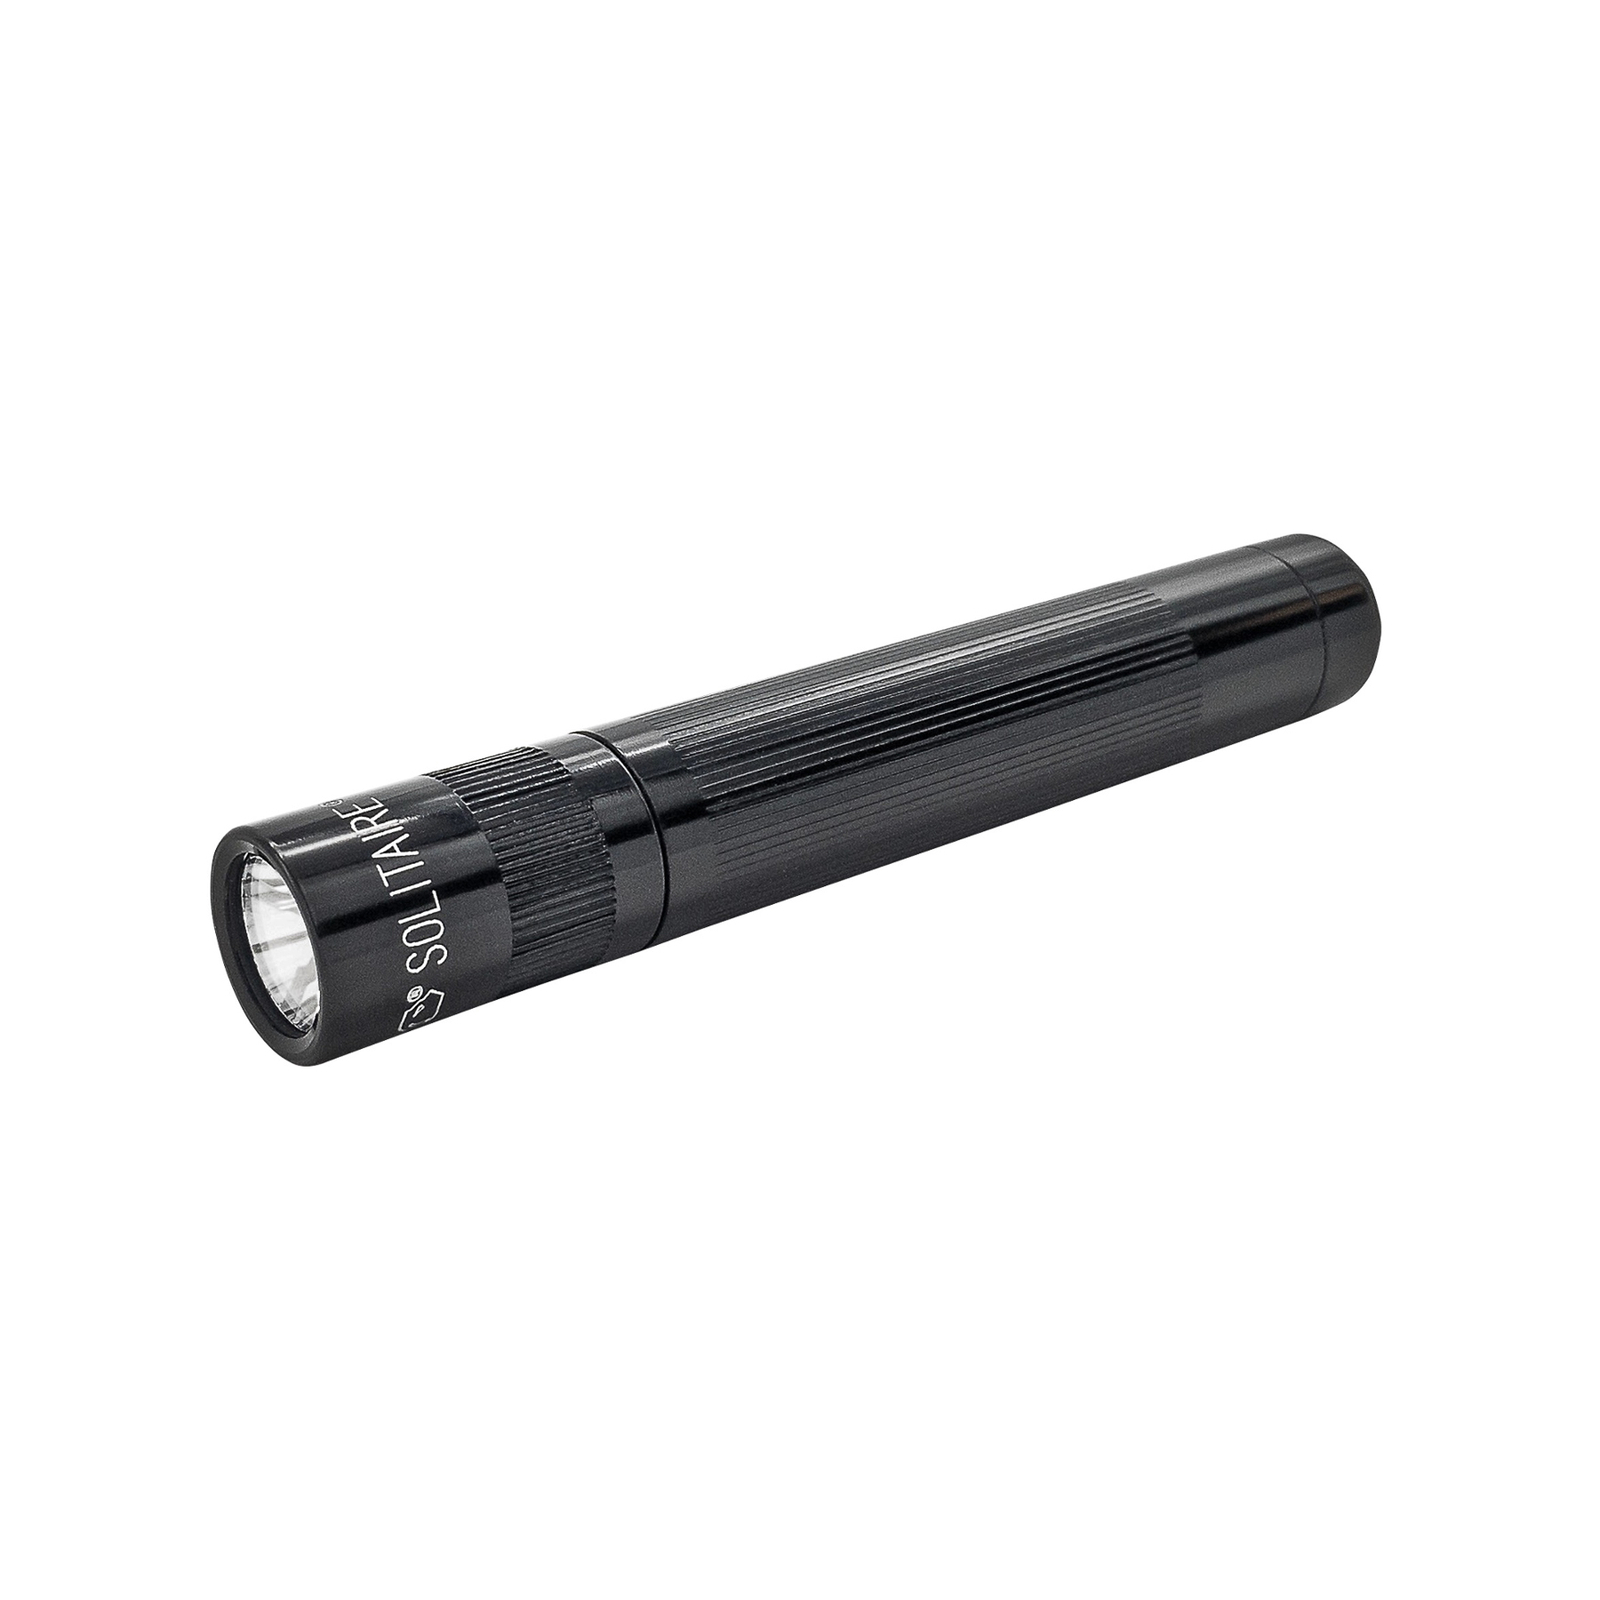 Maglite Xenon ficklampa Solitaire 1-cell AAA svart